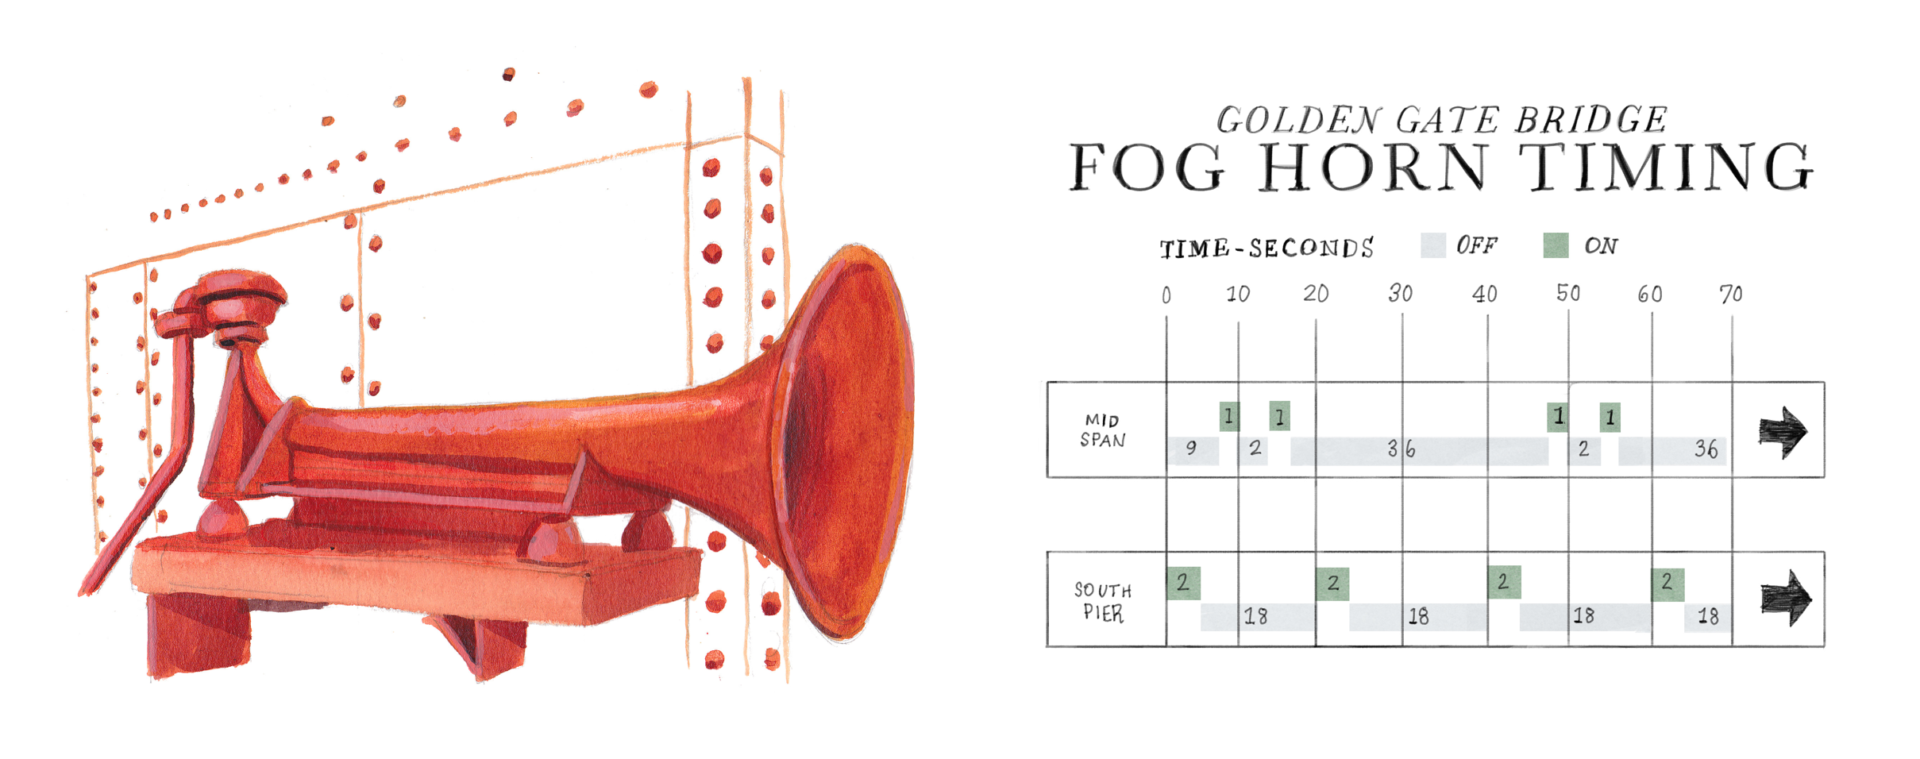 Illustration of the Golden Gate Bridge foghorn and its timing